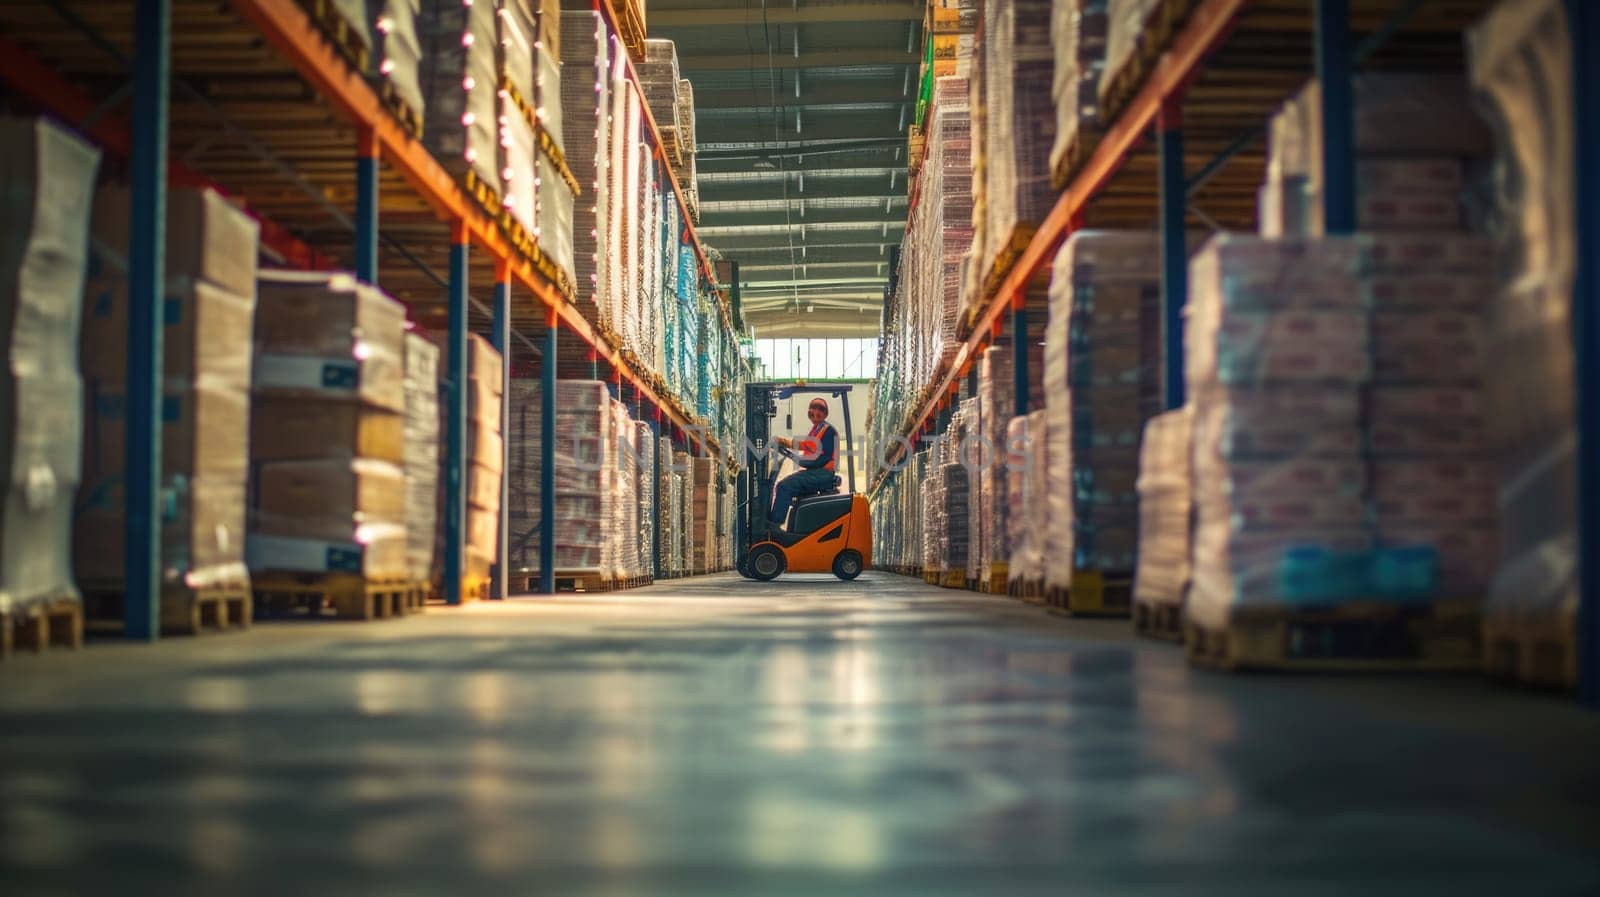 A man operates a forklift in a warehouse, transporting goods amidst shelves of building materials and wooden flooring. AIG41